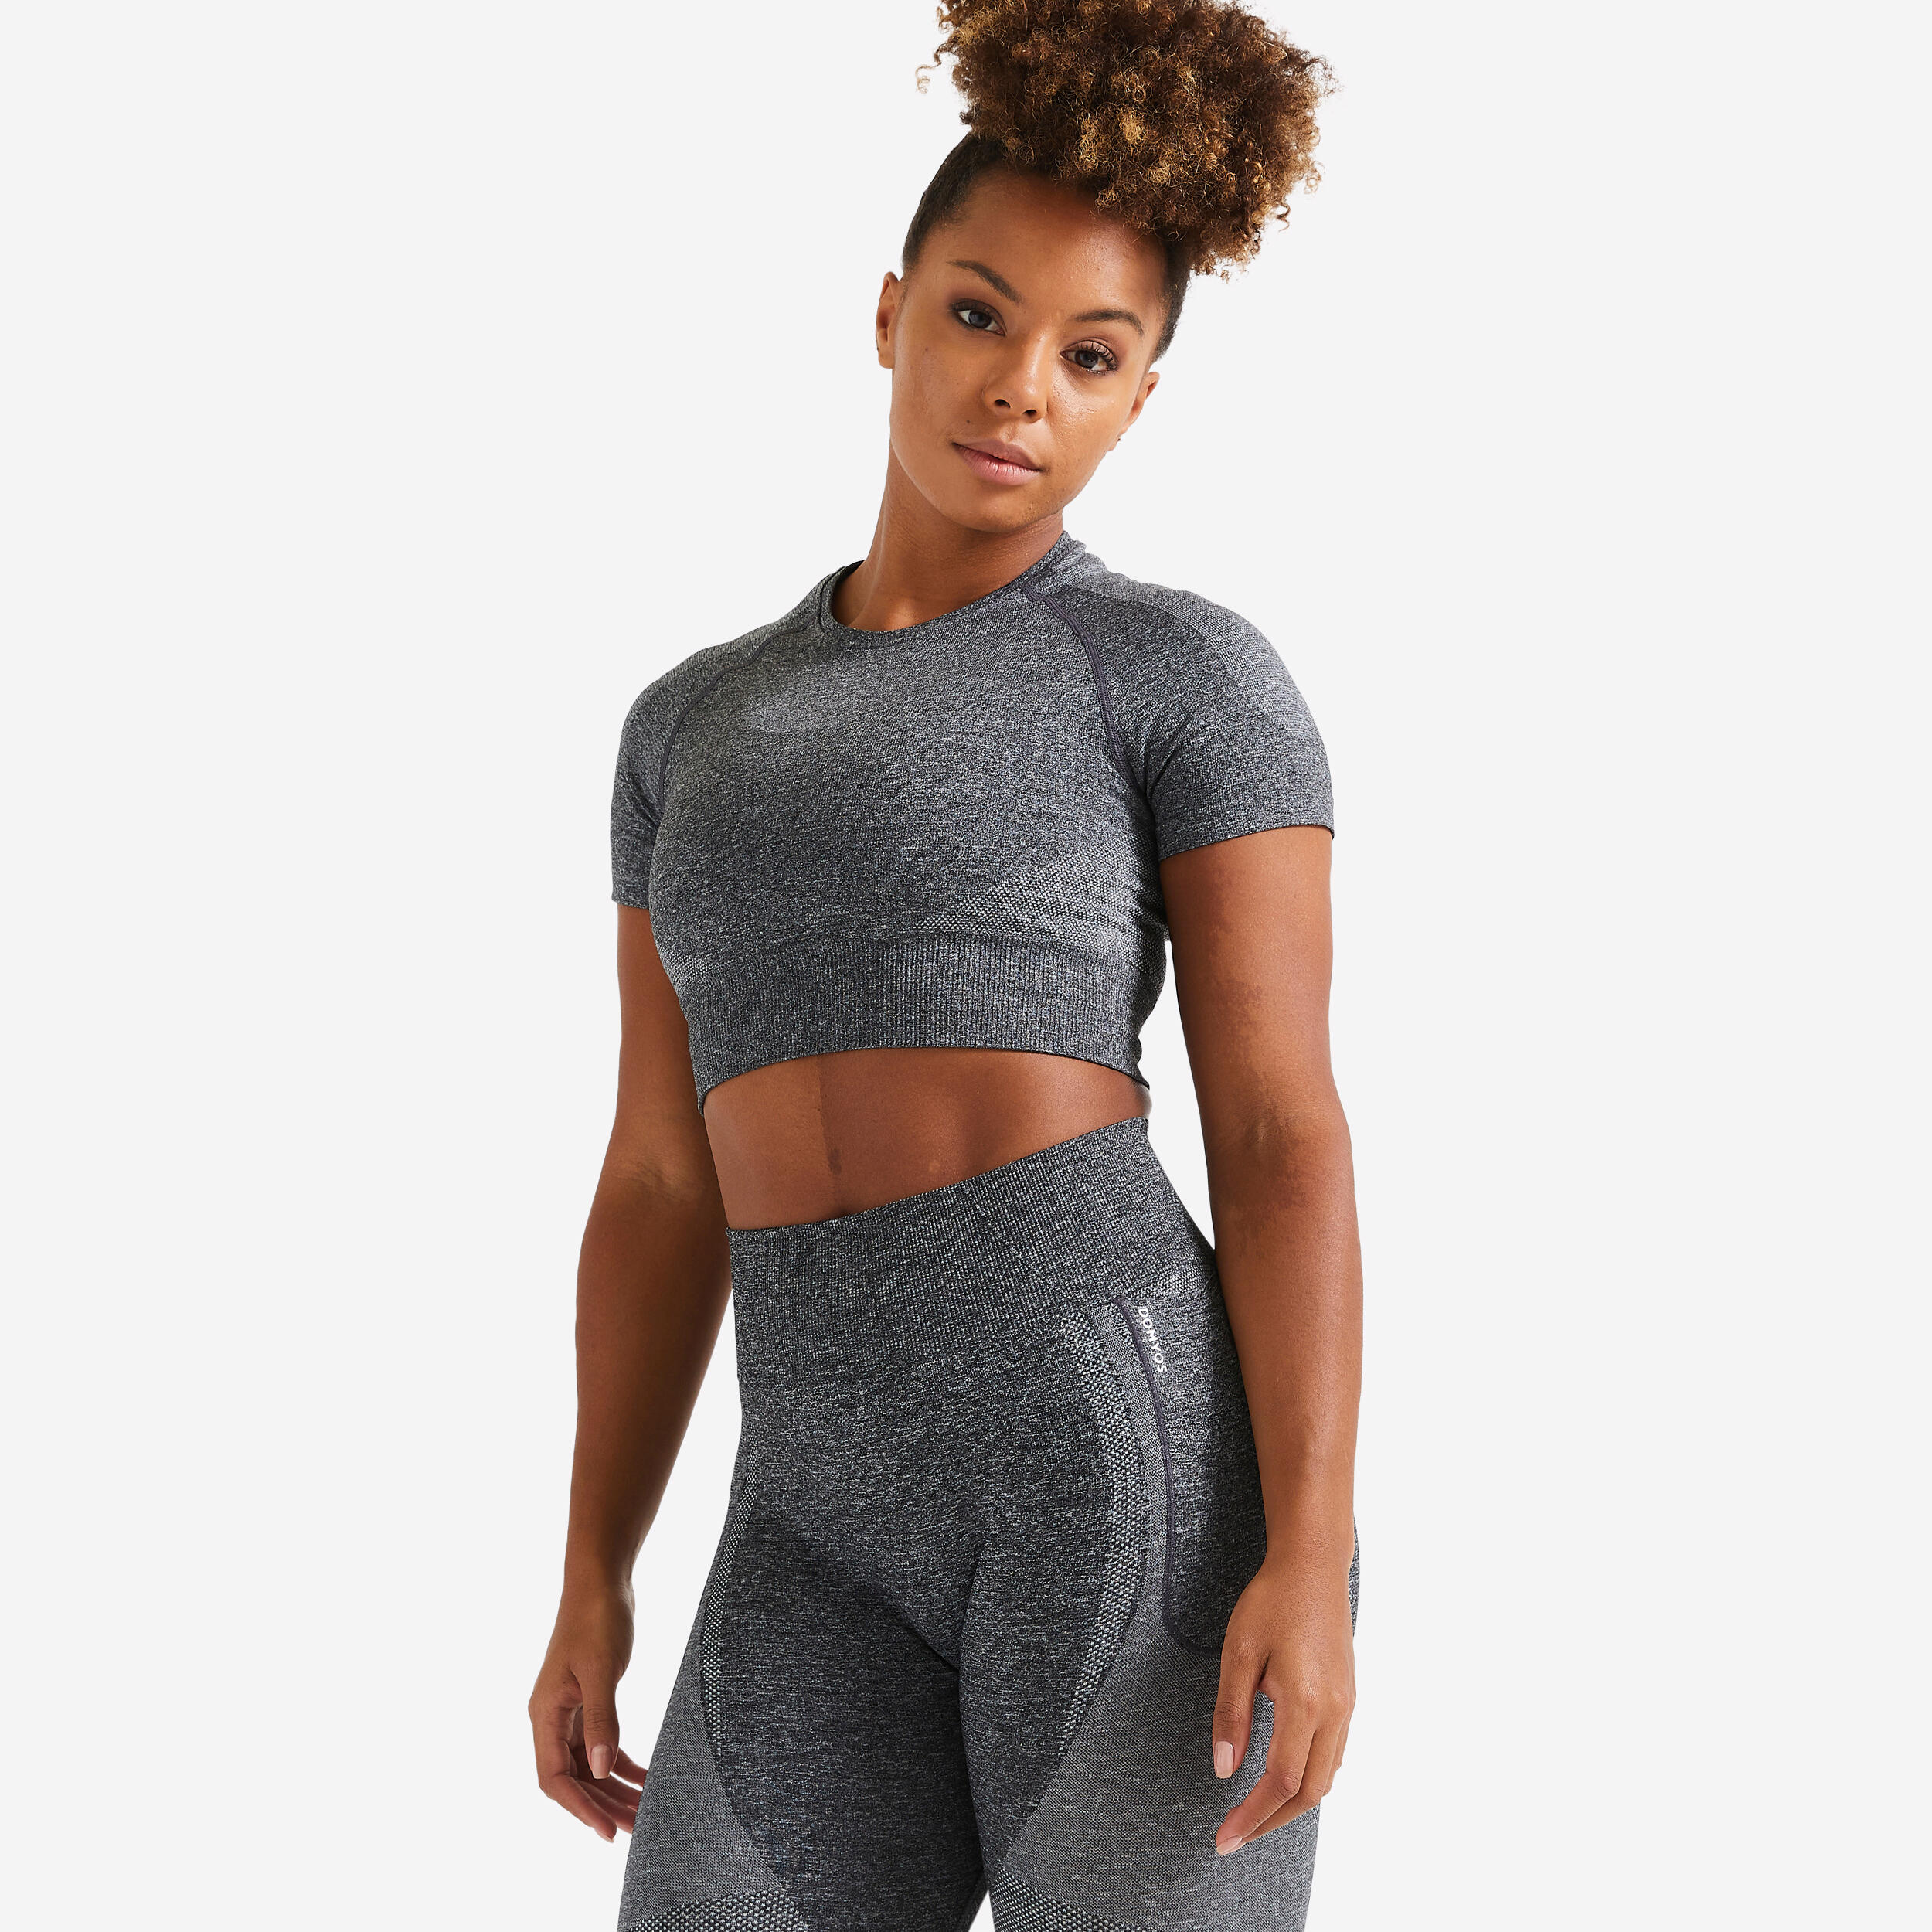 DOMYOS Seamless Short-Sleeved Cropped Fitness T-Shirt - Grey